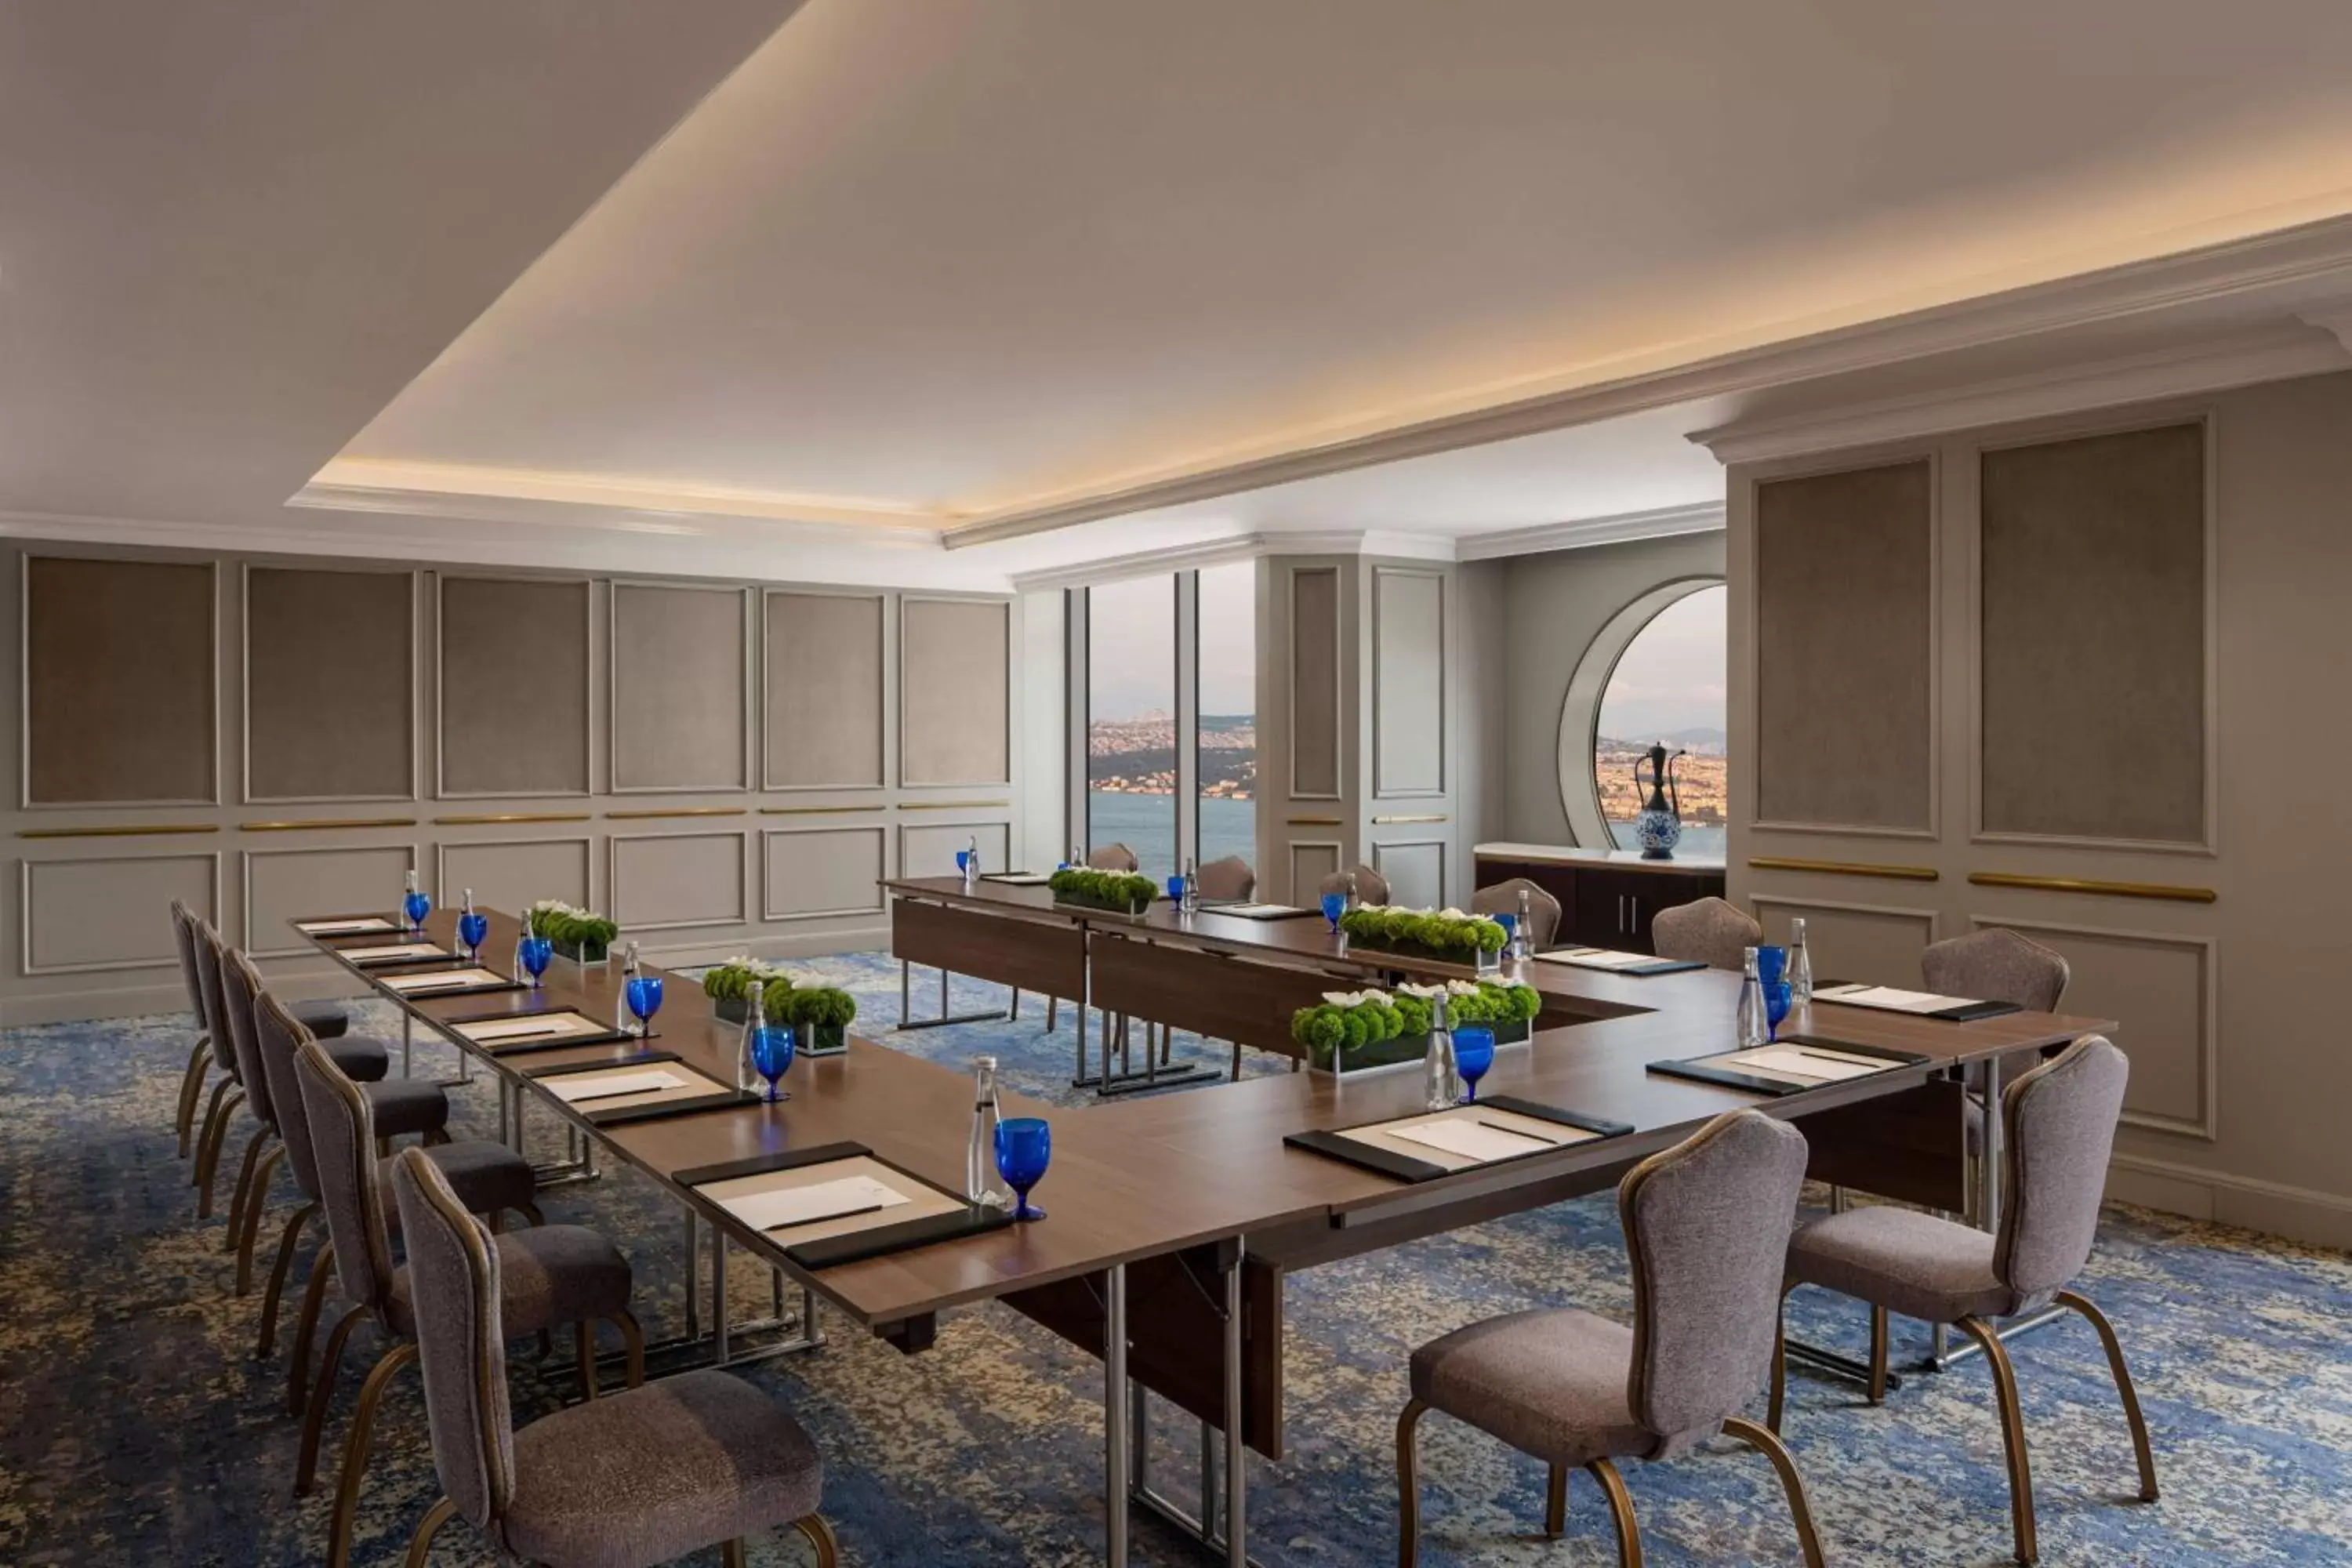 Meeting/conference room in The Ritz-Carlton, Istanbul at the Bosphorus